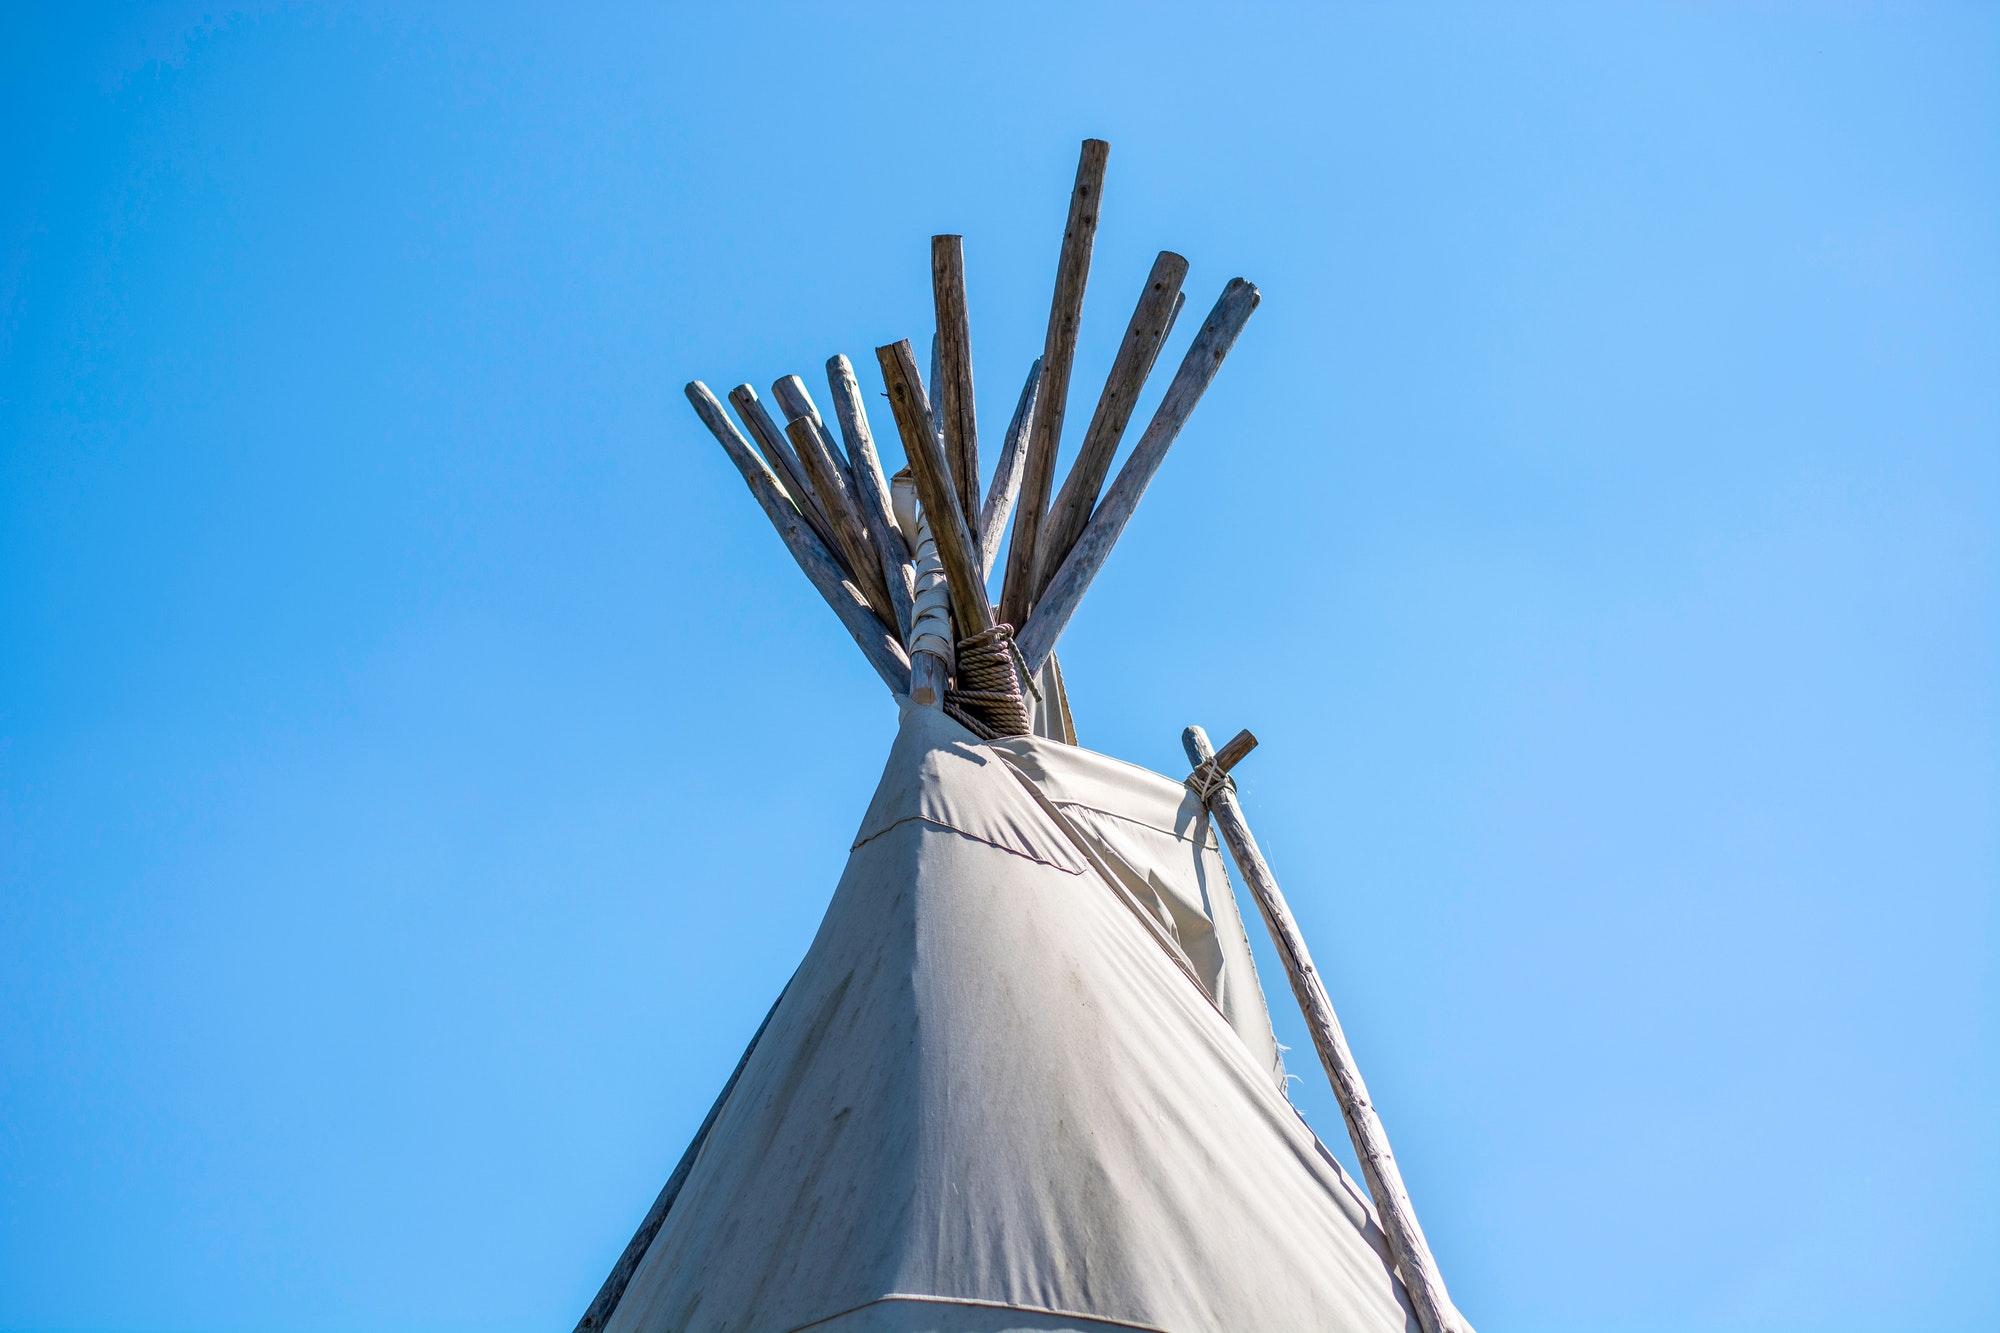 Top of a traditional wigwam lodge or teepee tent against clear blue sky background